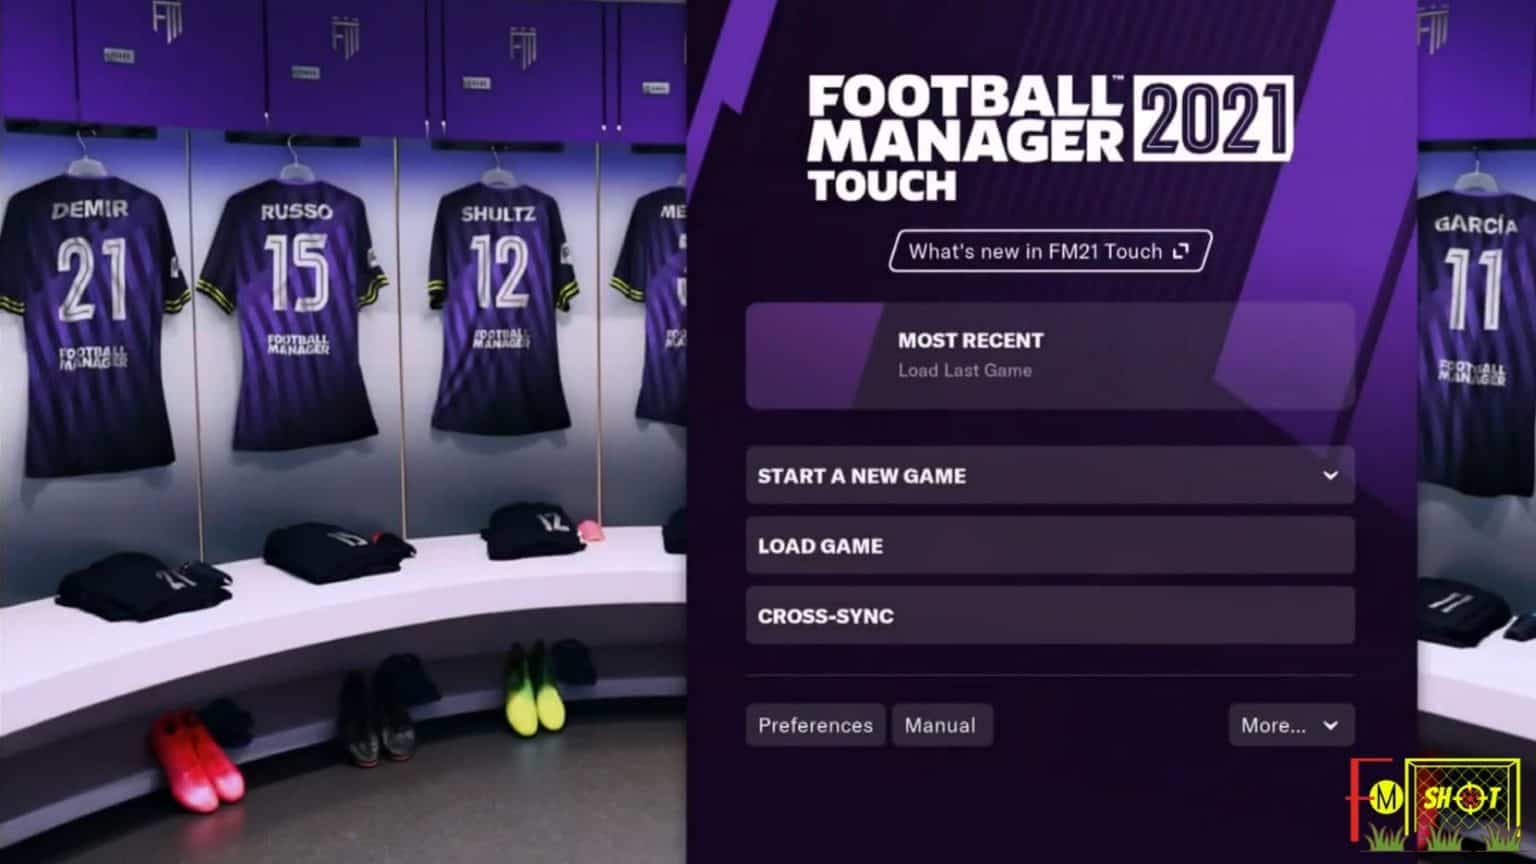 Football Manager 2021 Touch Vs. FM21 Mobile